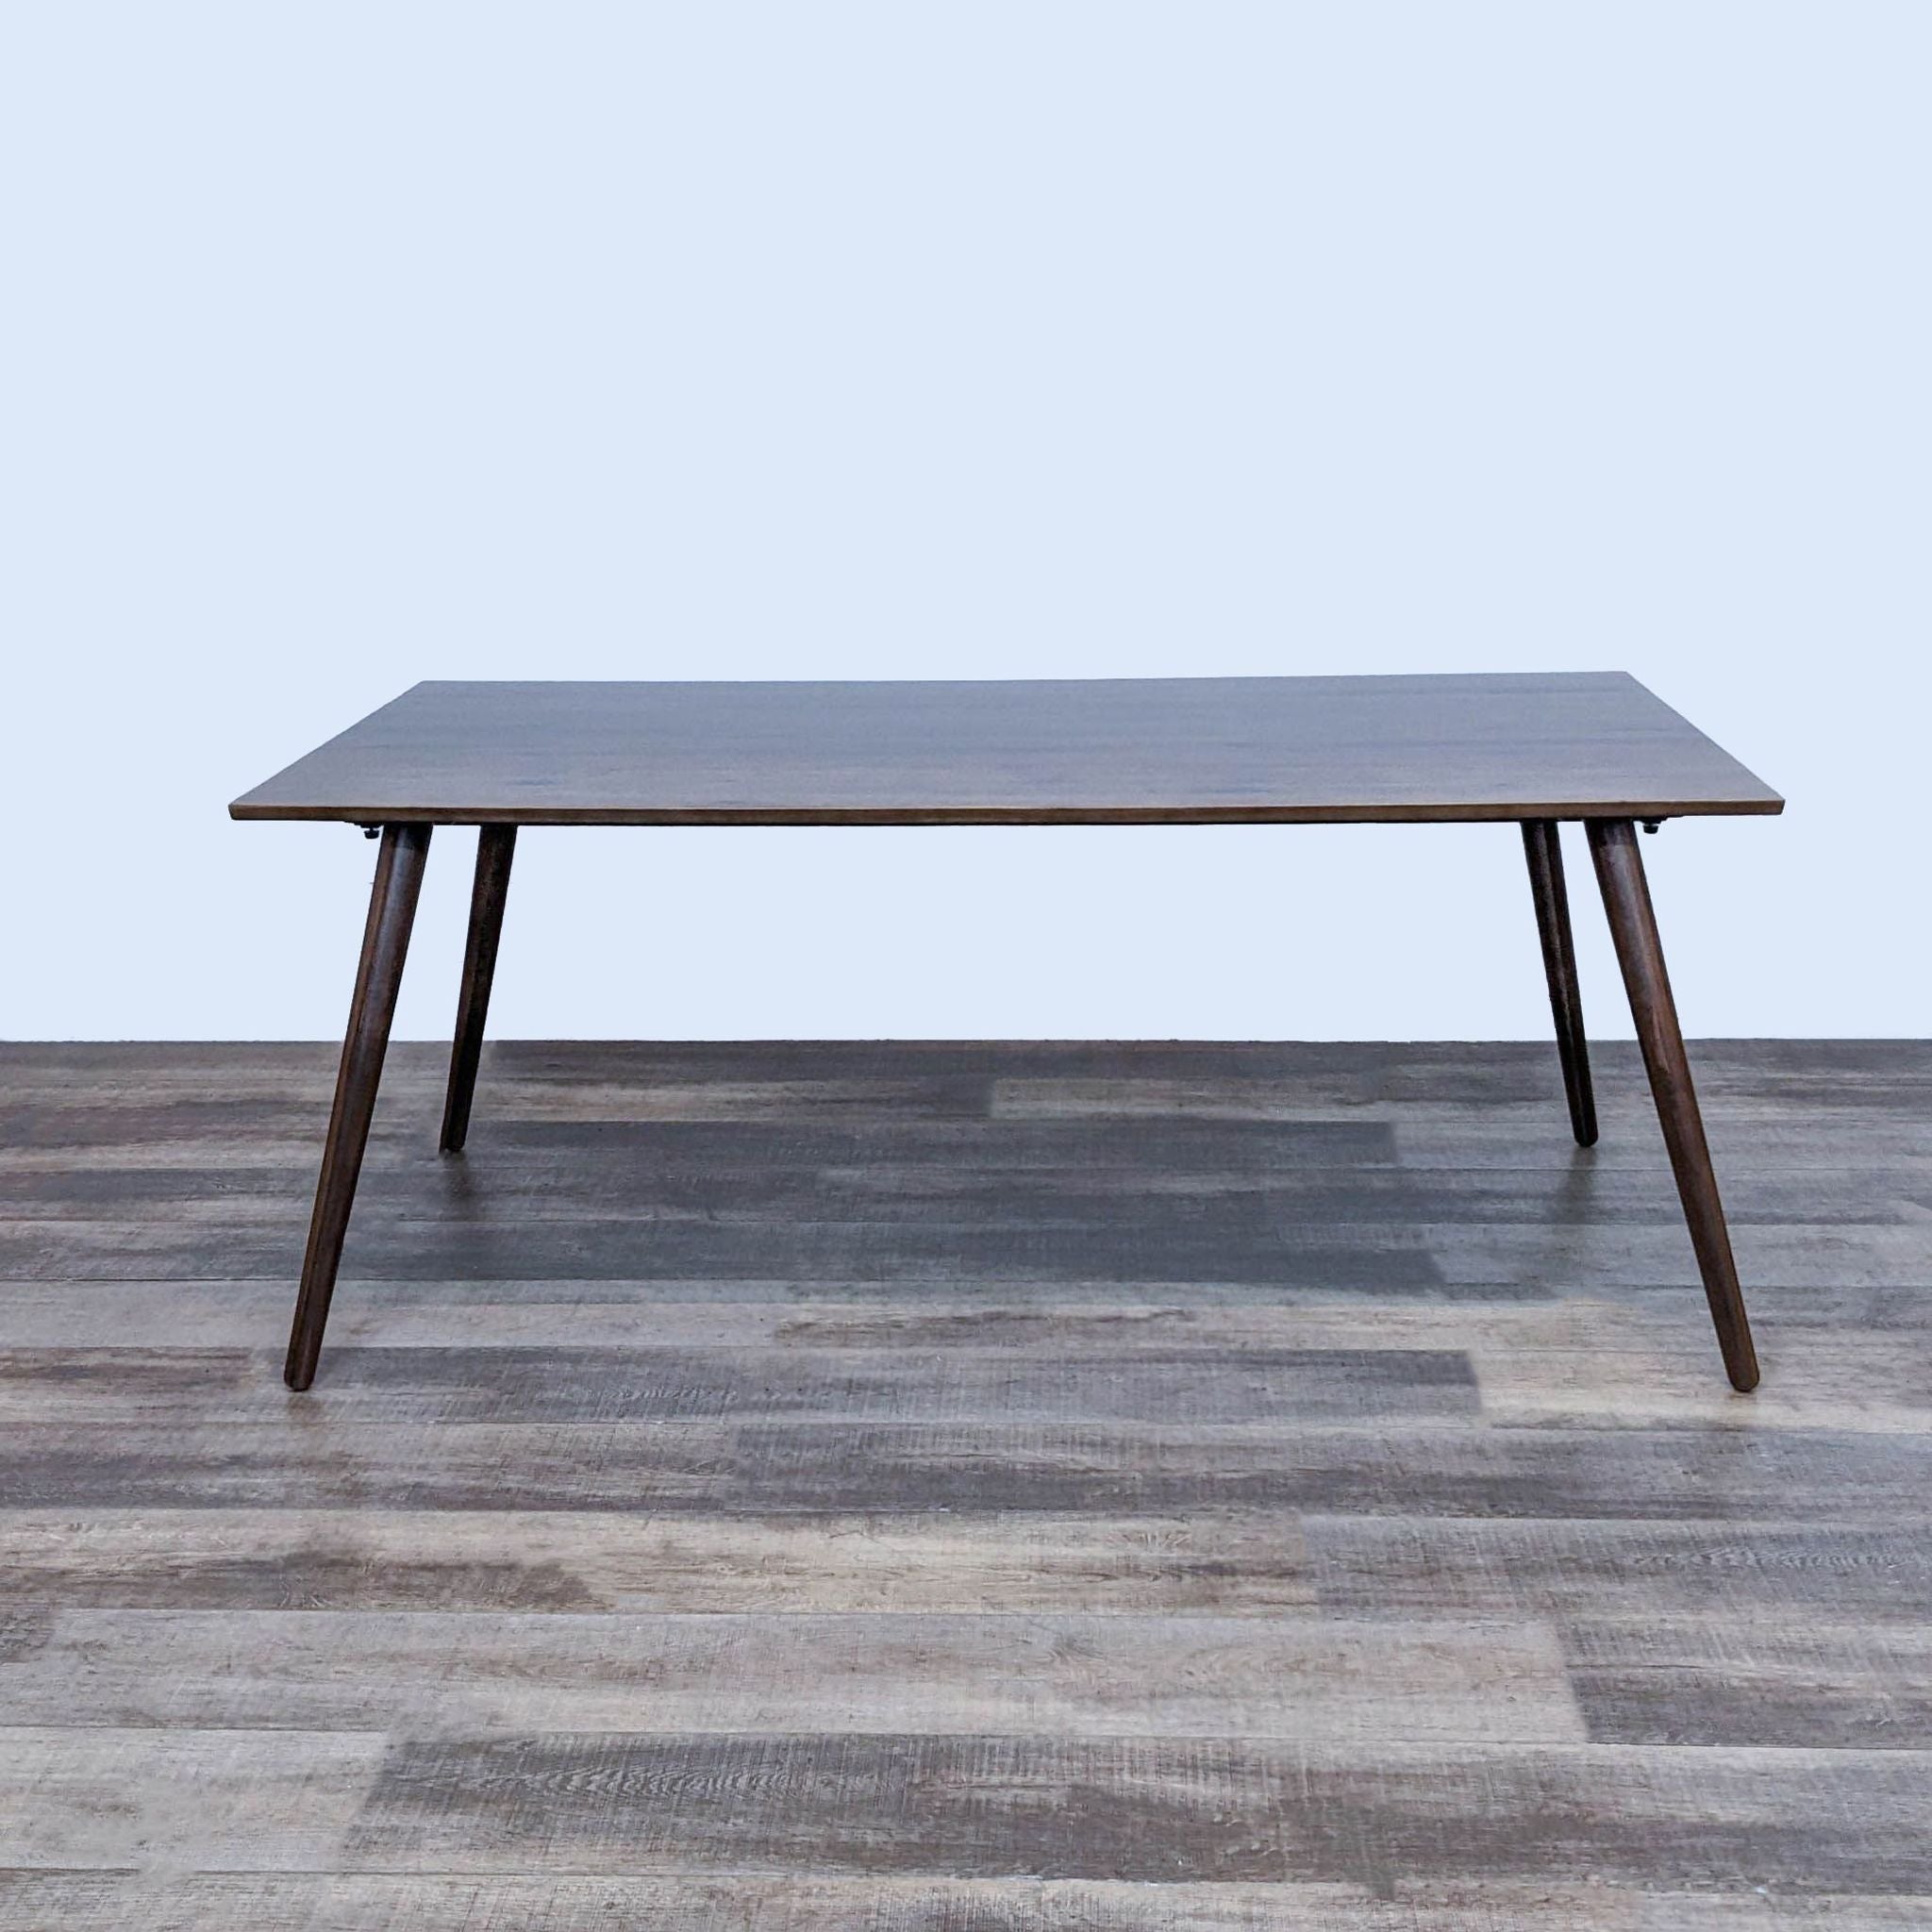 Article Seno Dining Table with tapered wood legs and a smooth top, exhibiting mid-century modern style.